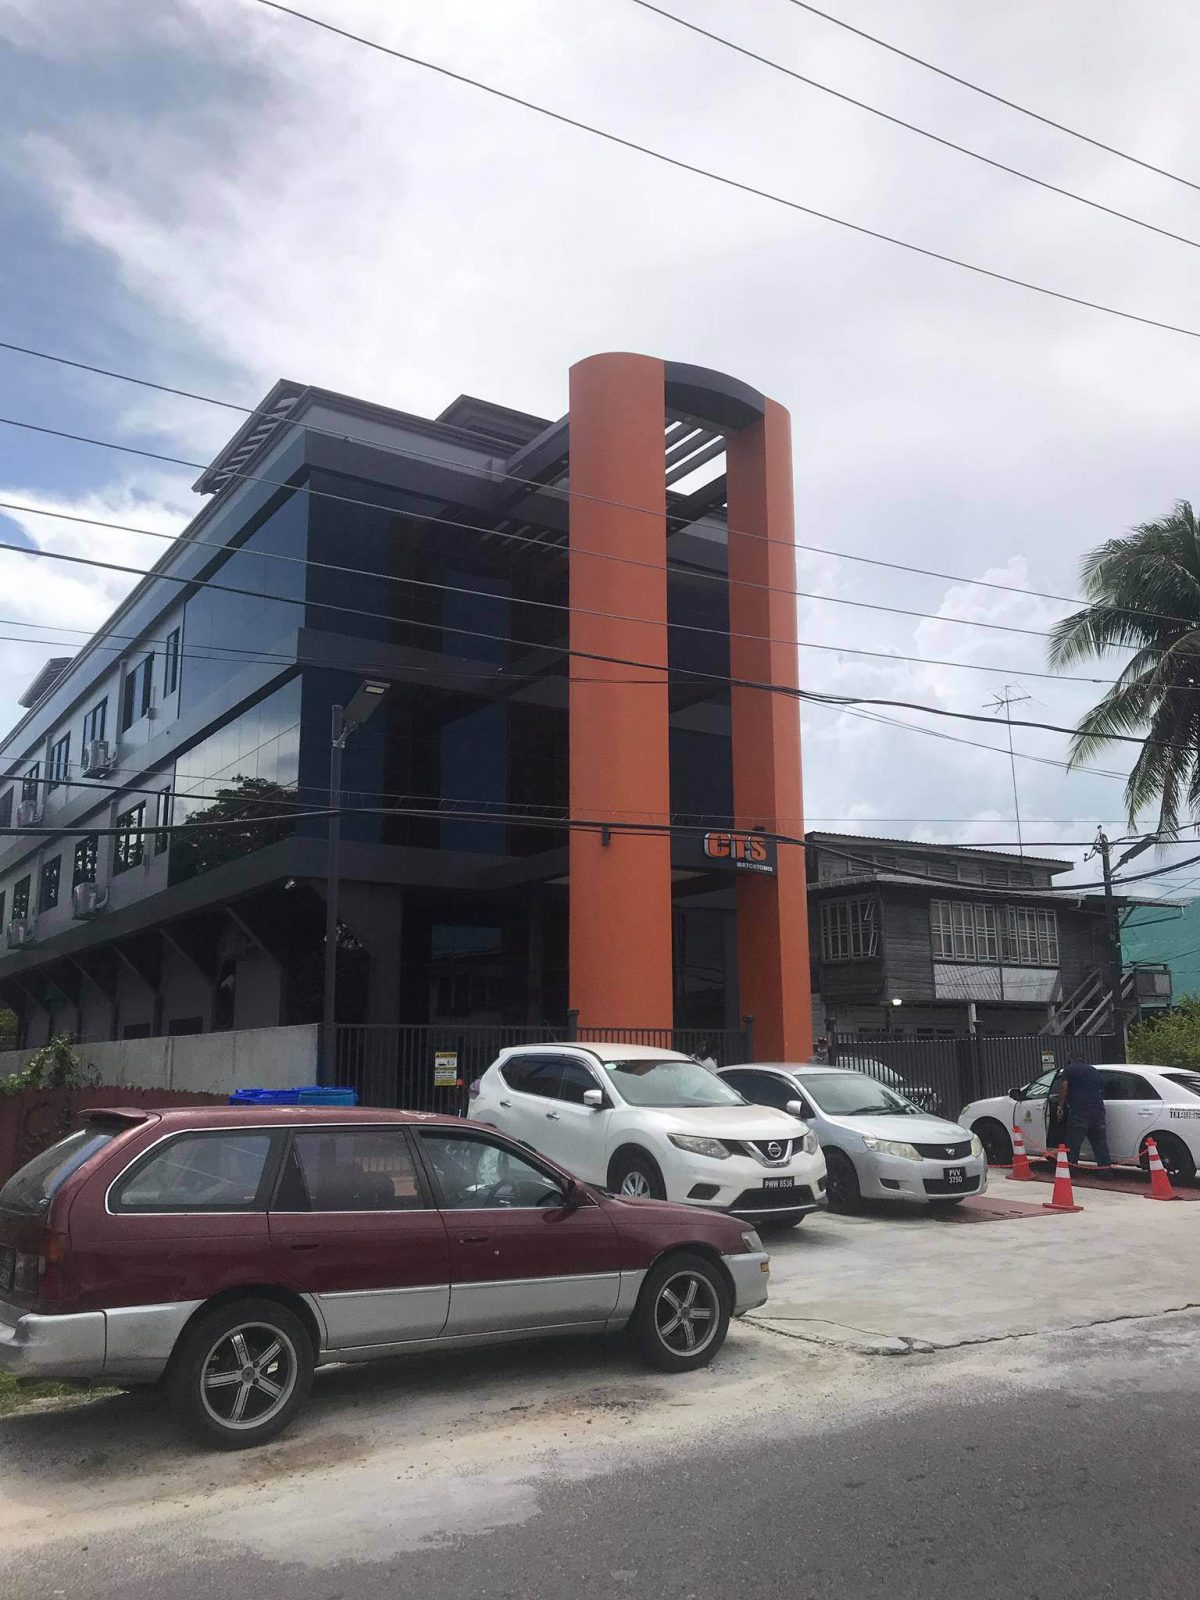 The Cyril’s Transportation Service headquarters in David Street, Kitty. The company has already expanded its operations and also has another property which was transformed into a parking lot a short distance away on the same street.